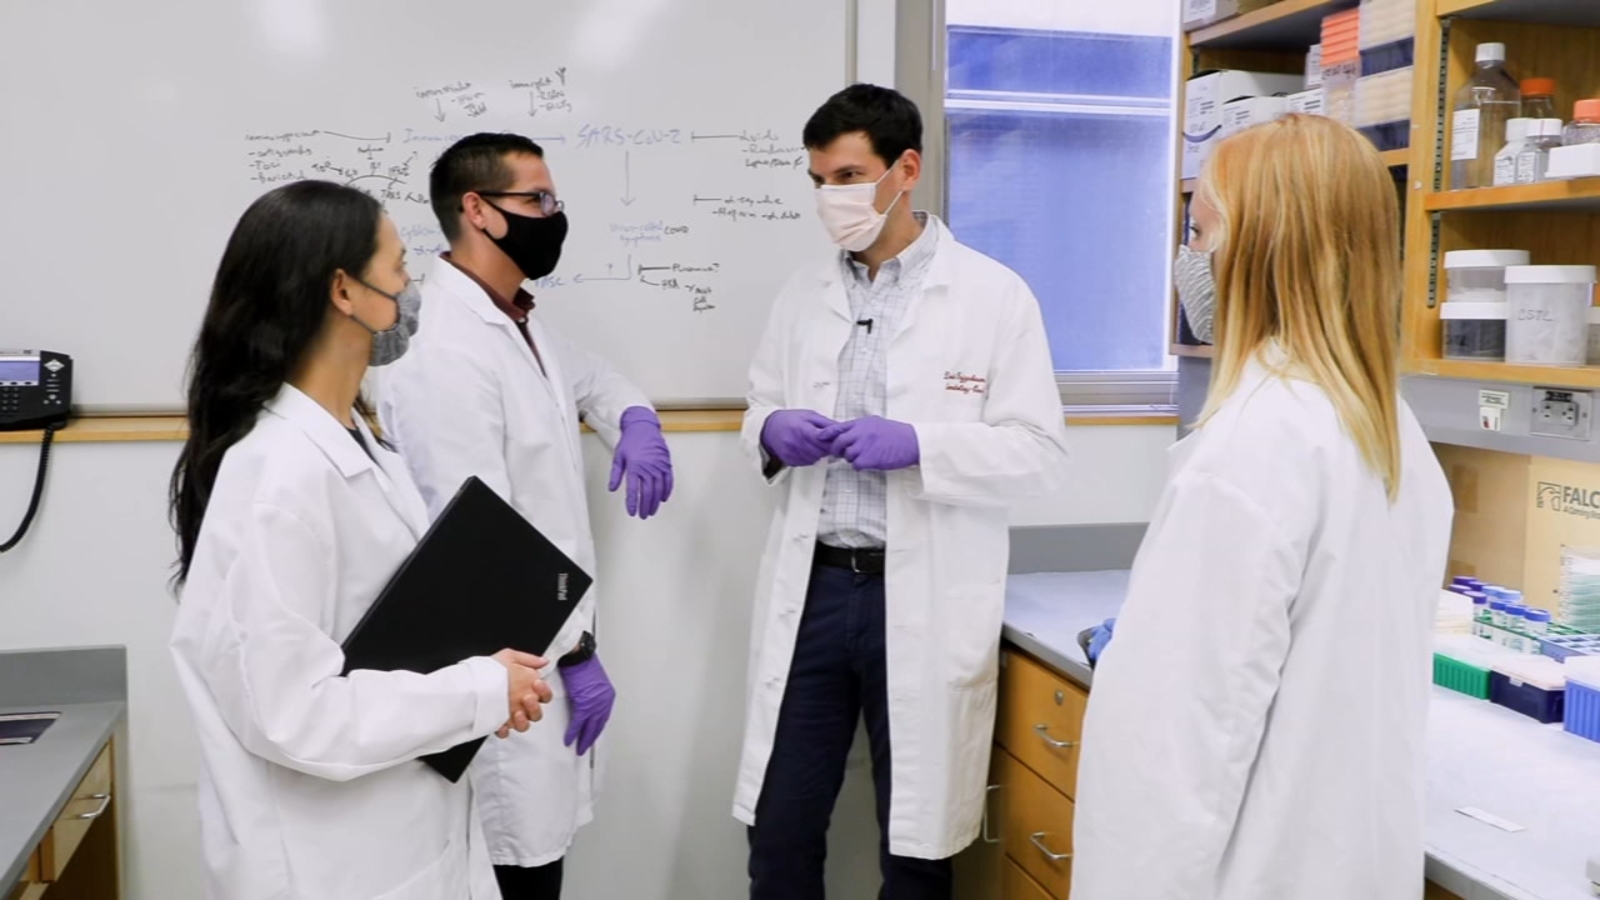 David Fajgenbaum, Co-Founder & Executive Director of the Castleman Disease Collaborative Network working in his lab alongside colleagues